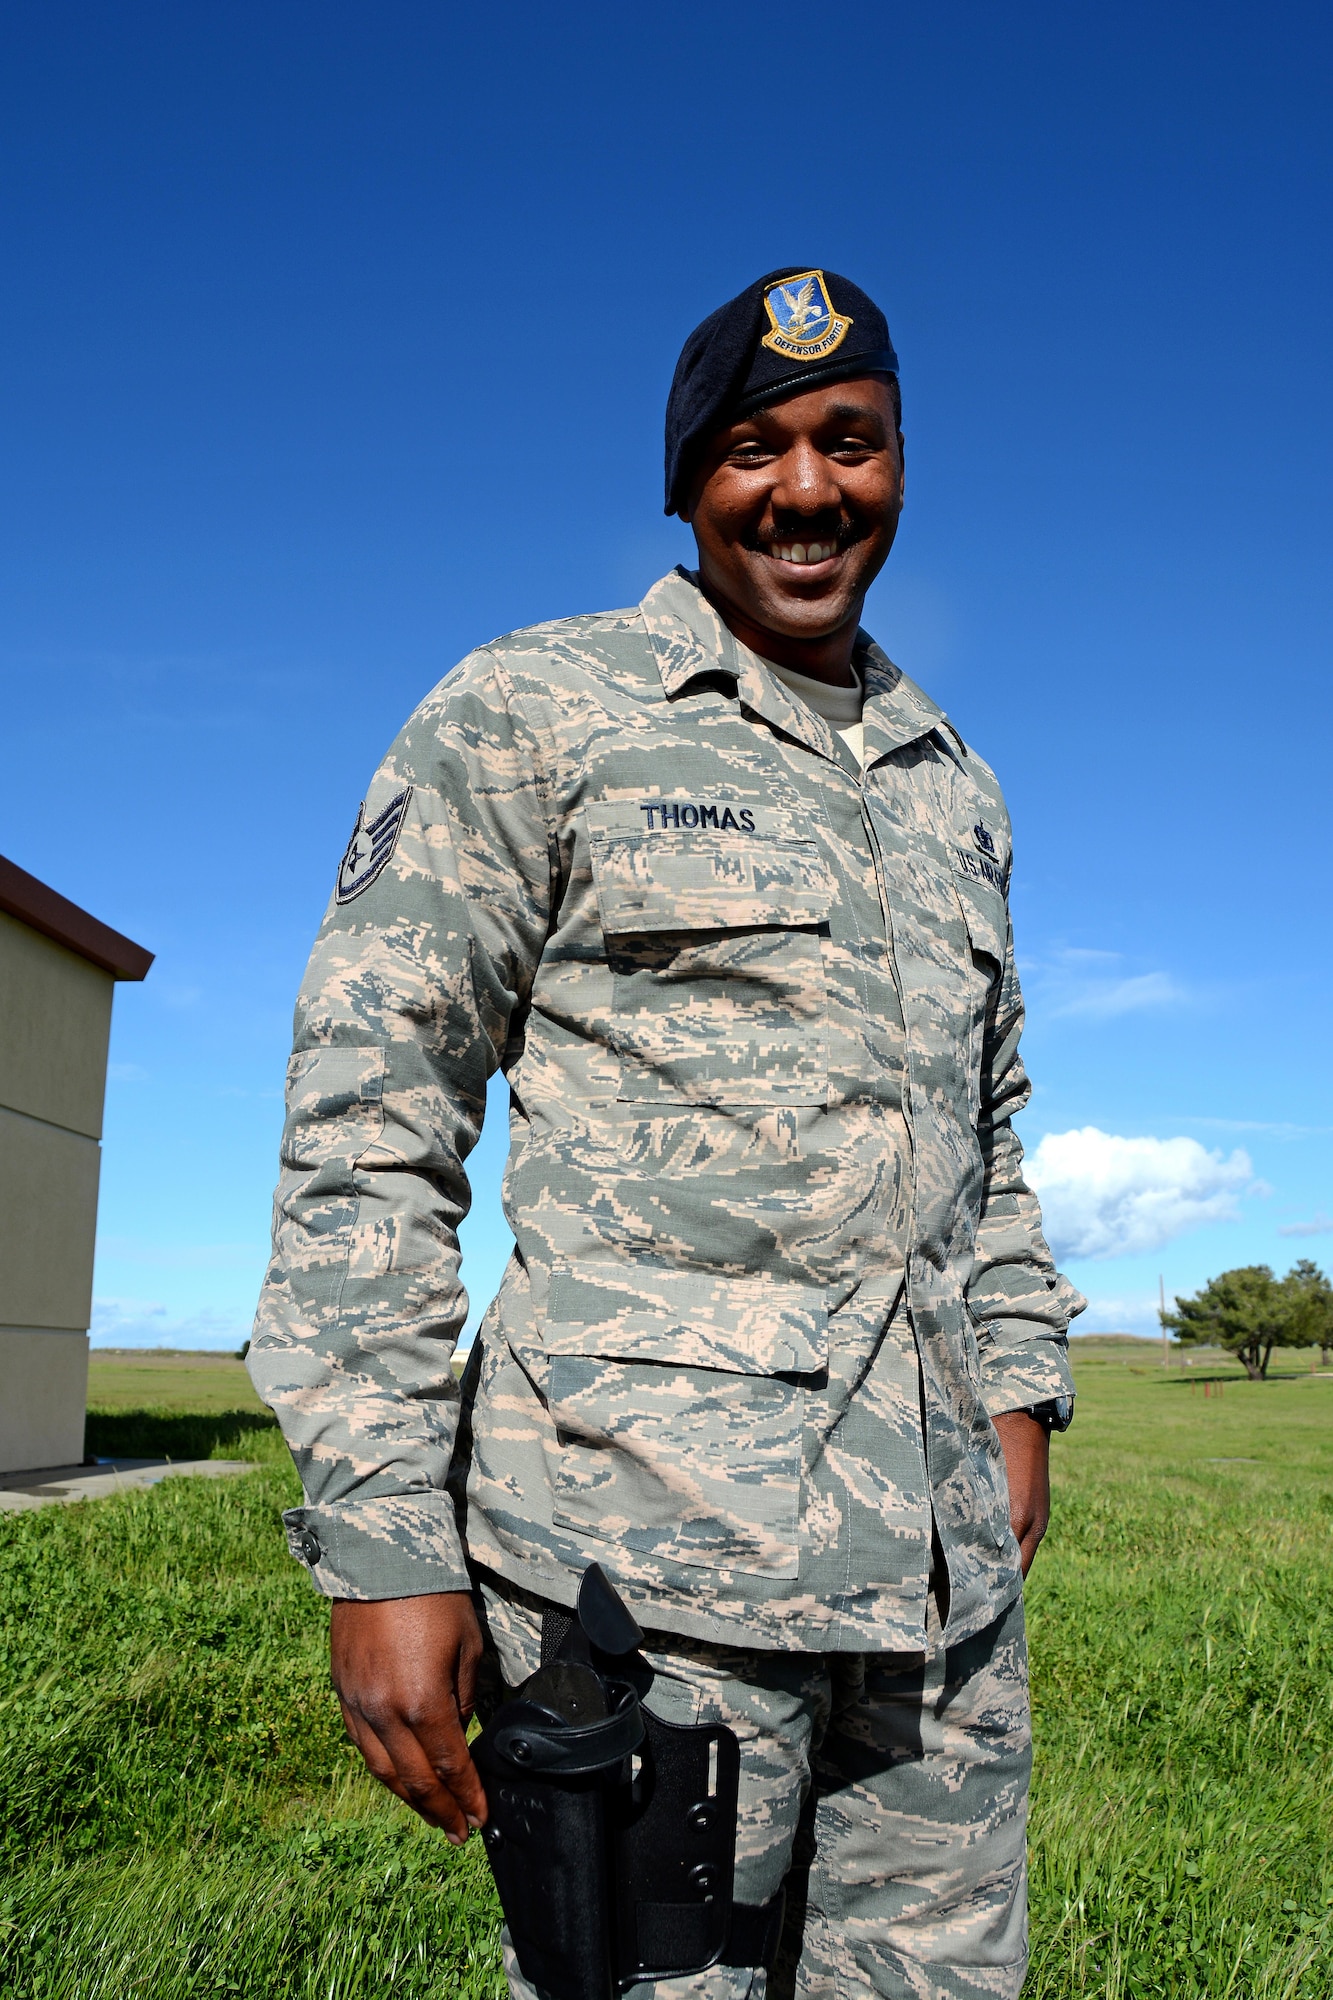 Staff Sgt. Dante Thomas, 349th Security Forces Squadron member, poses for a photo outside of the combat arms building at Travis Air Force Base, Calif., on March 9, 2017. Thomas recently took part in Exercise Cope North 2017 in Guam. He and Staff Sgt. Rochelle Waters, another 349 SFS member, saved the life of a drowning child during an off-day on the assignment. (U.S. Air Force photo/Staff Sgt. Daniel Phelps)